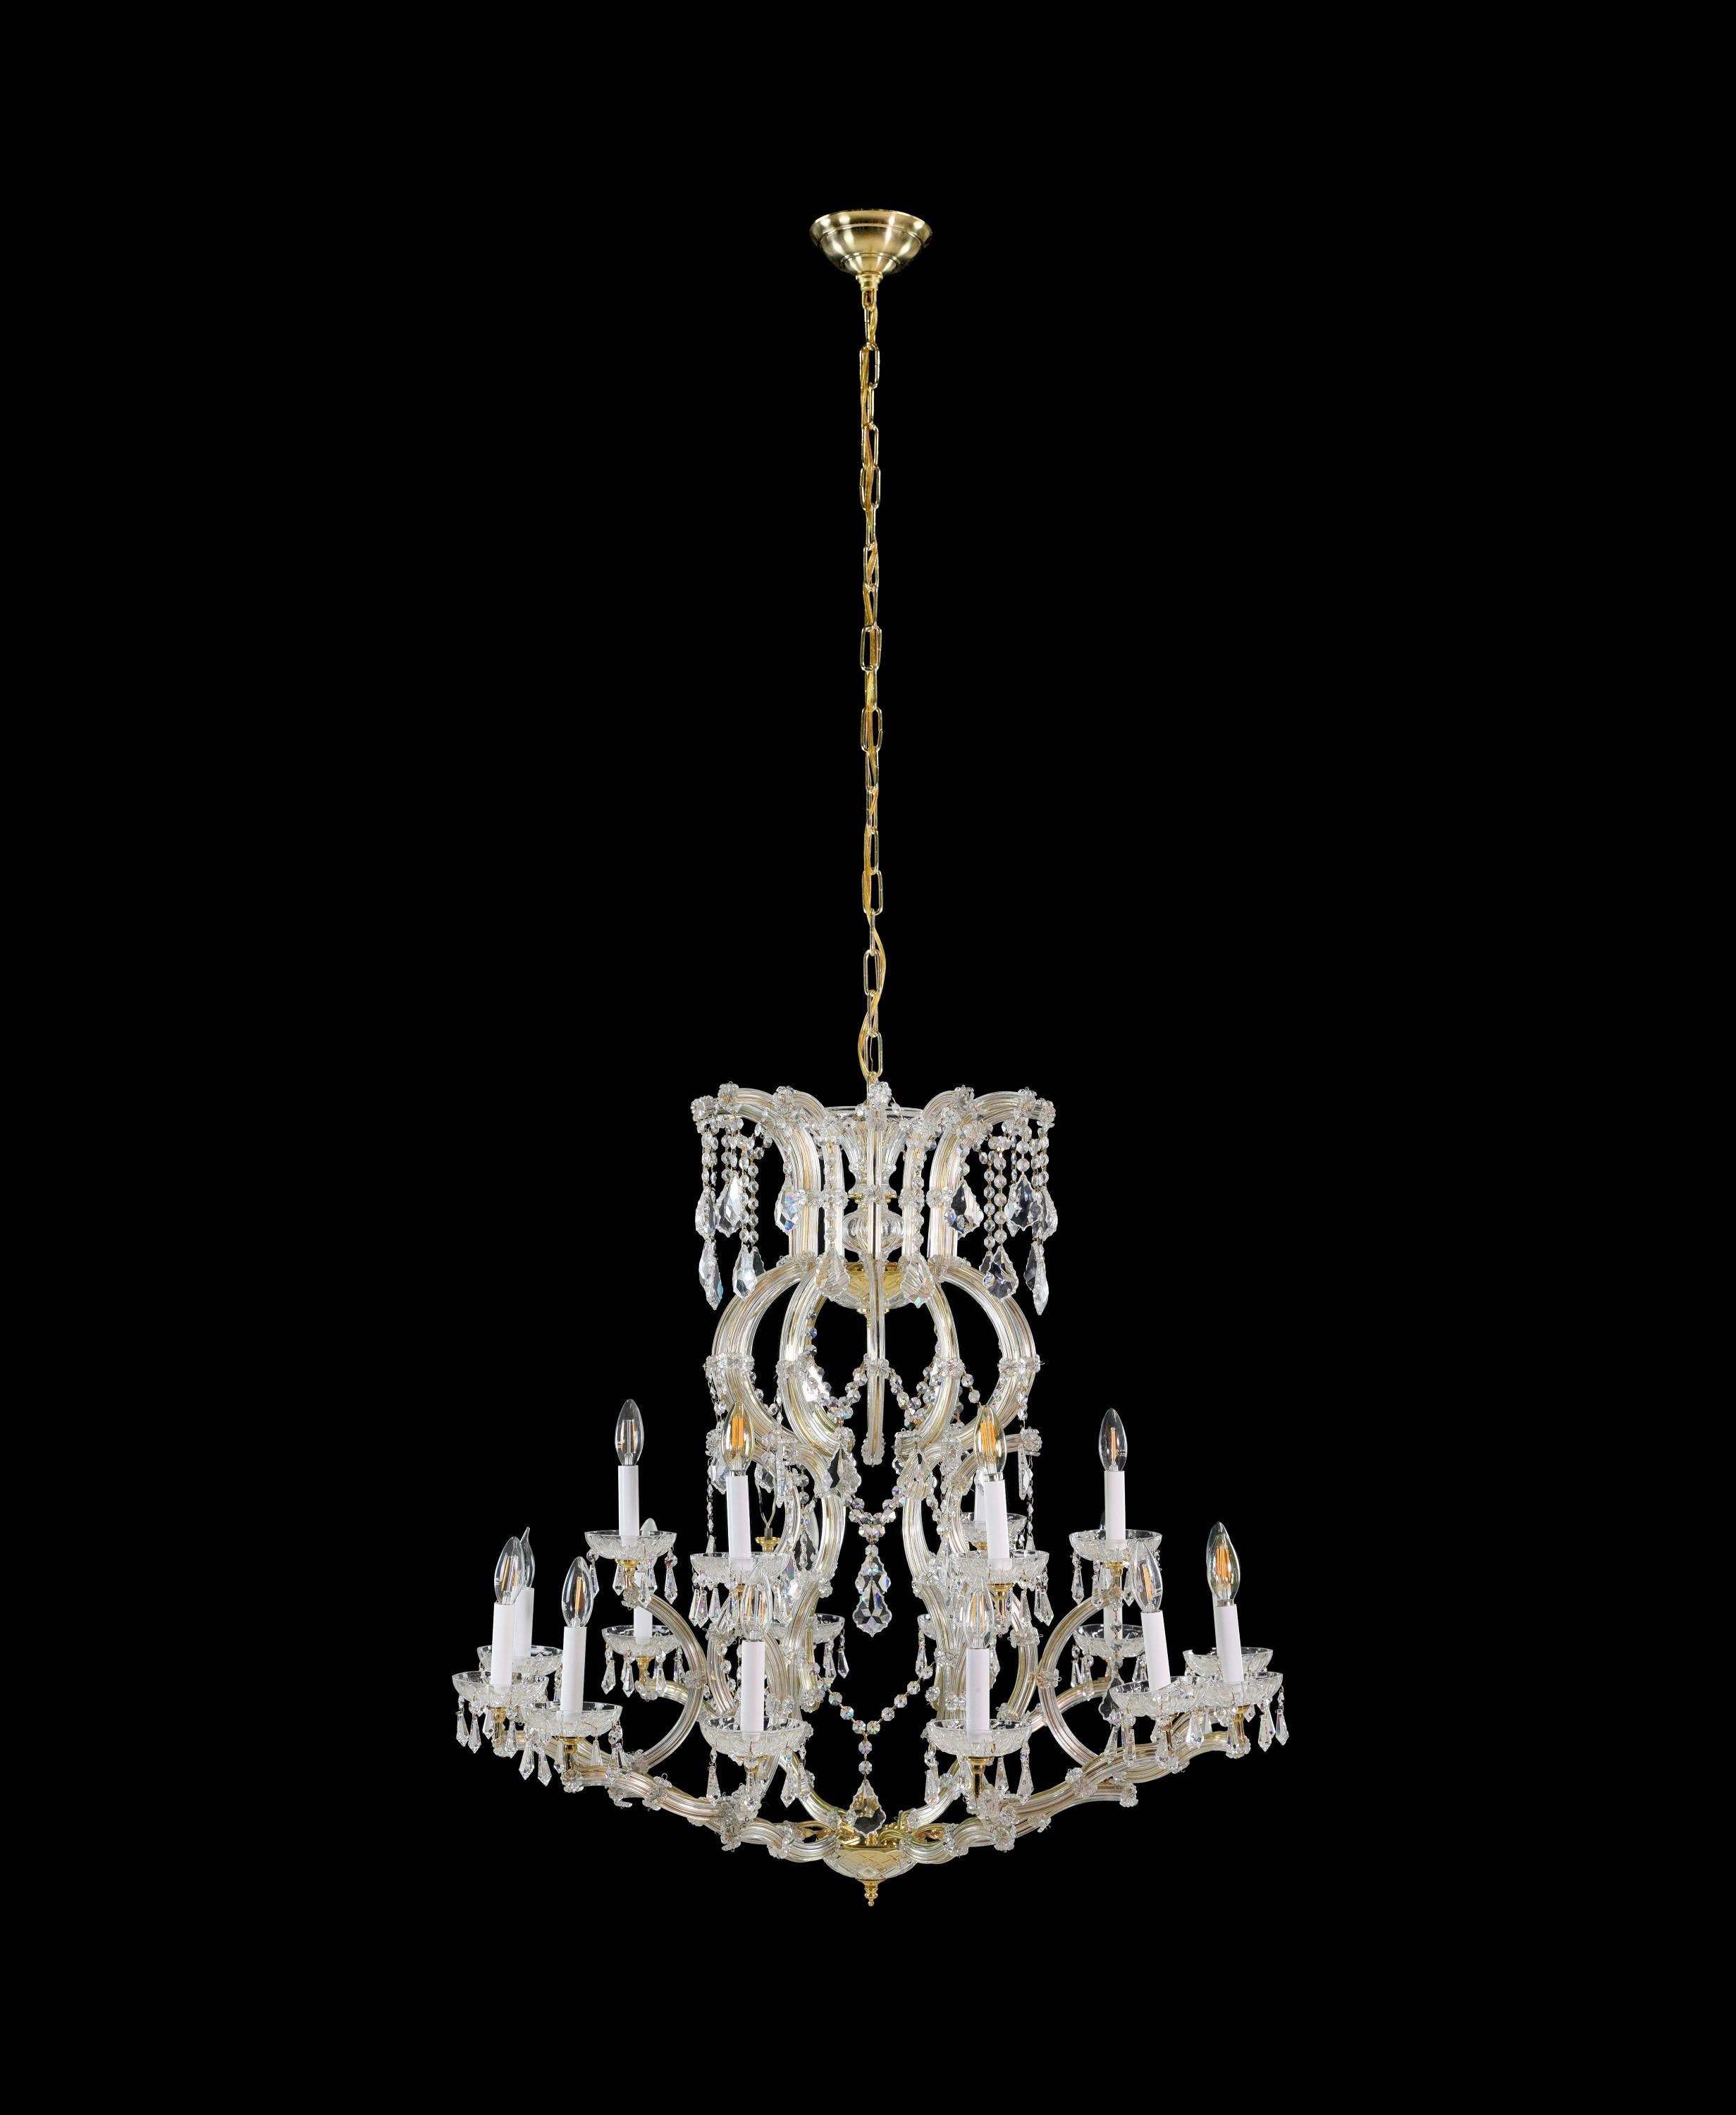 The elegant six arm eighteen lights Marie Therese crystal & brass chandelier exudes timeless beauty. With its intricate brass frame and sparkling crystal accents, it illuminates any space with a dazzling radiance. This exquisite chandelier is a